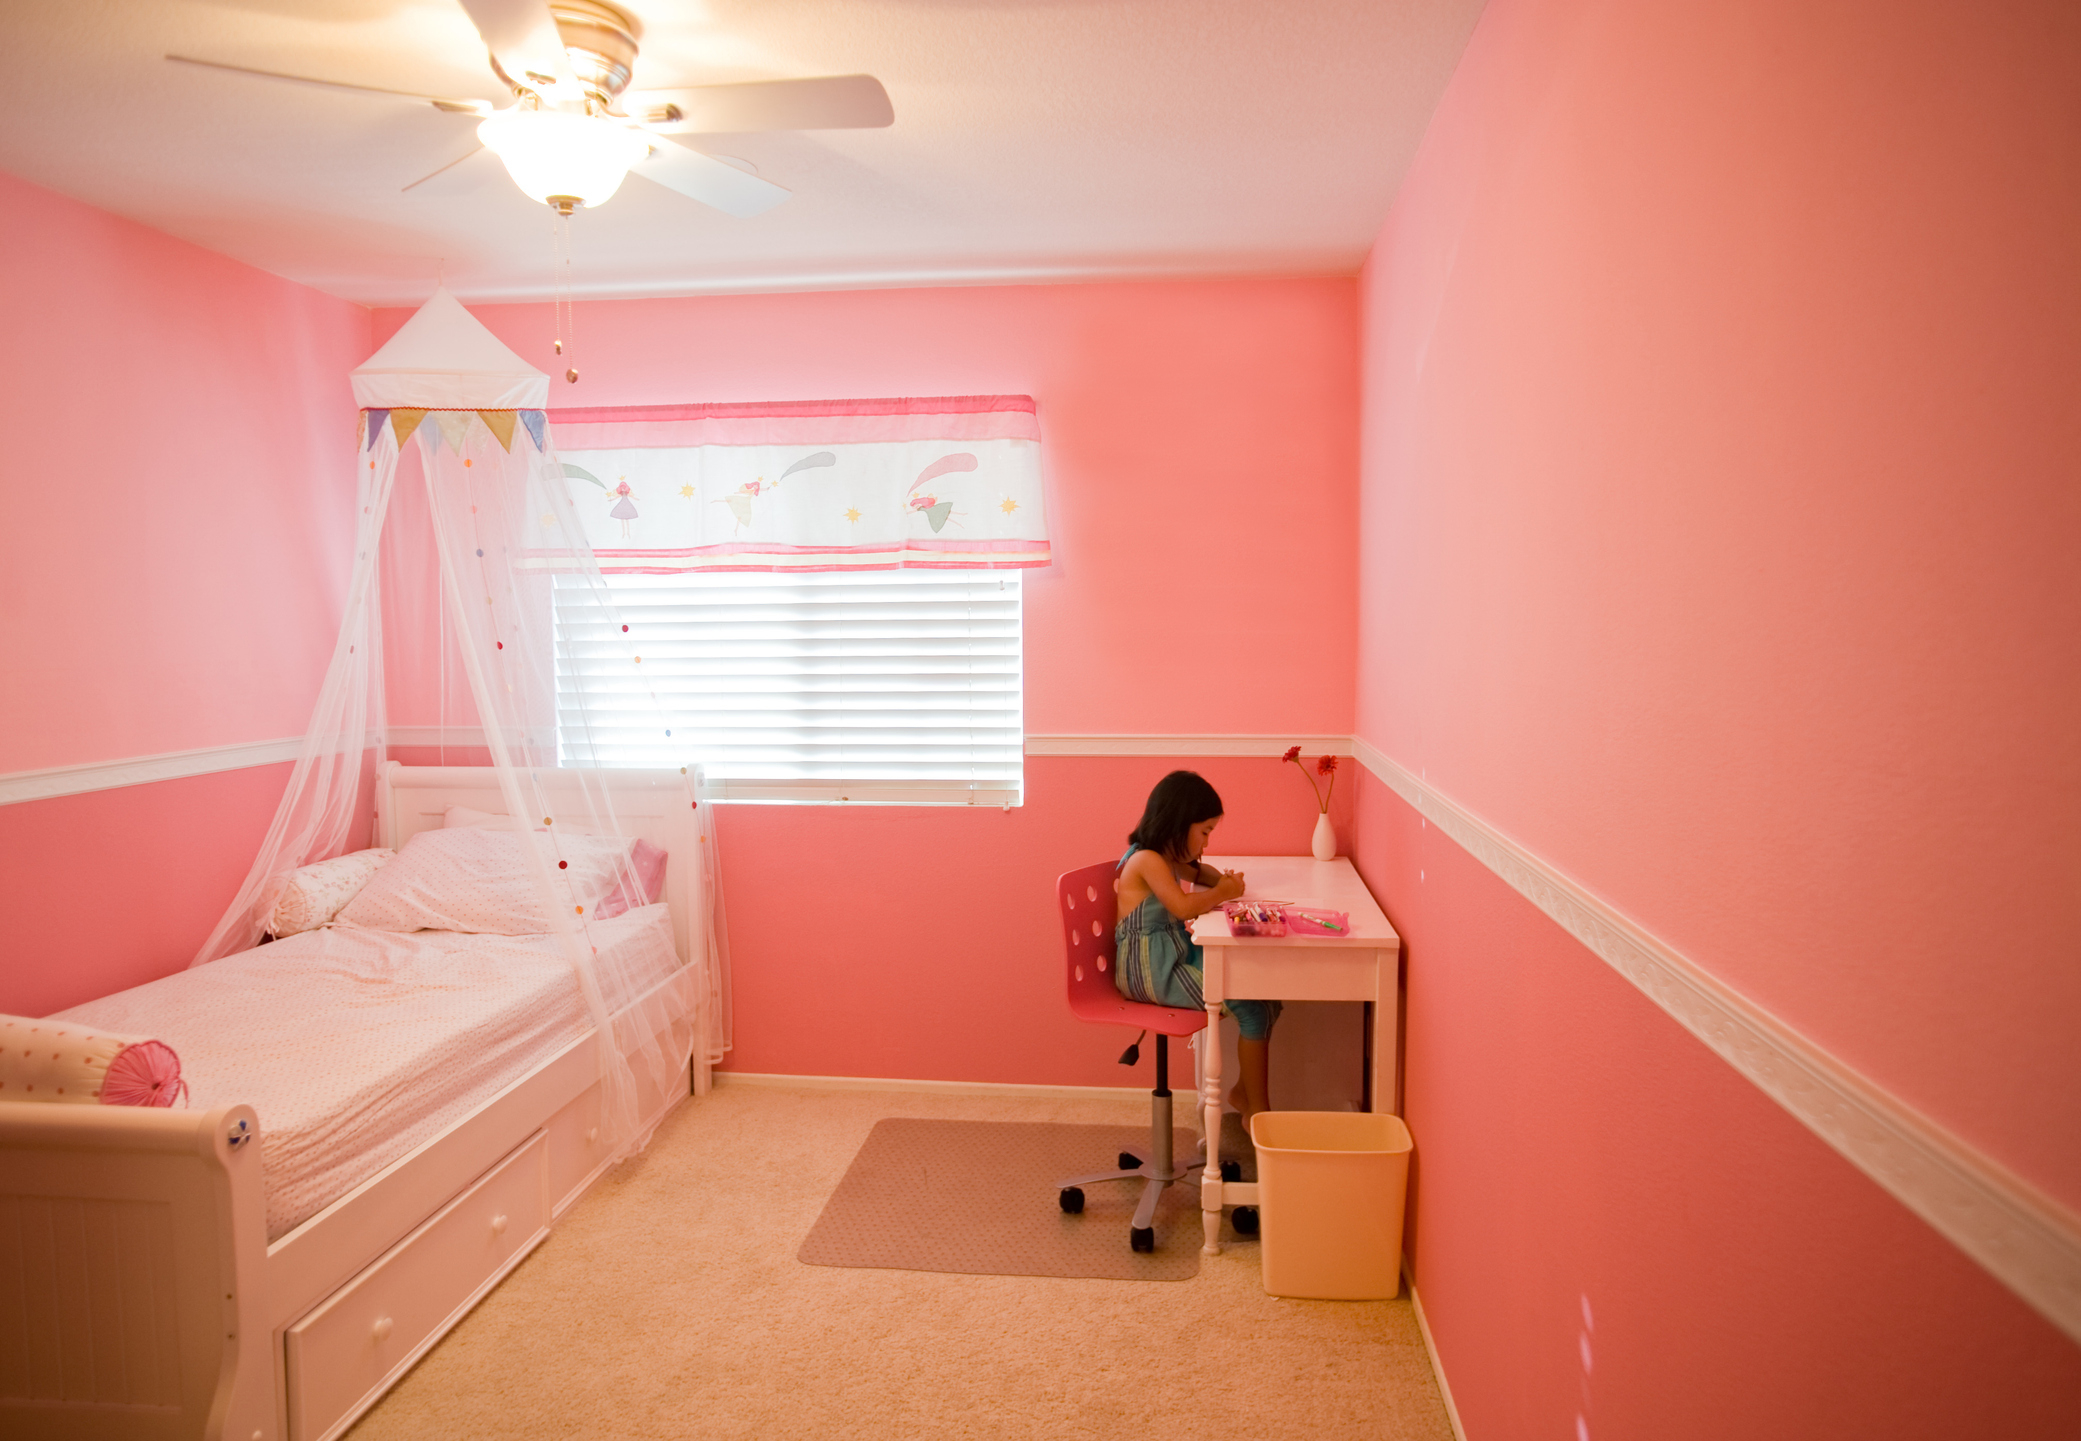 Child focusing on an activity at a desk in a pink-themed bedroom